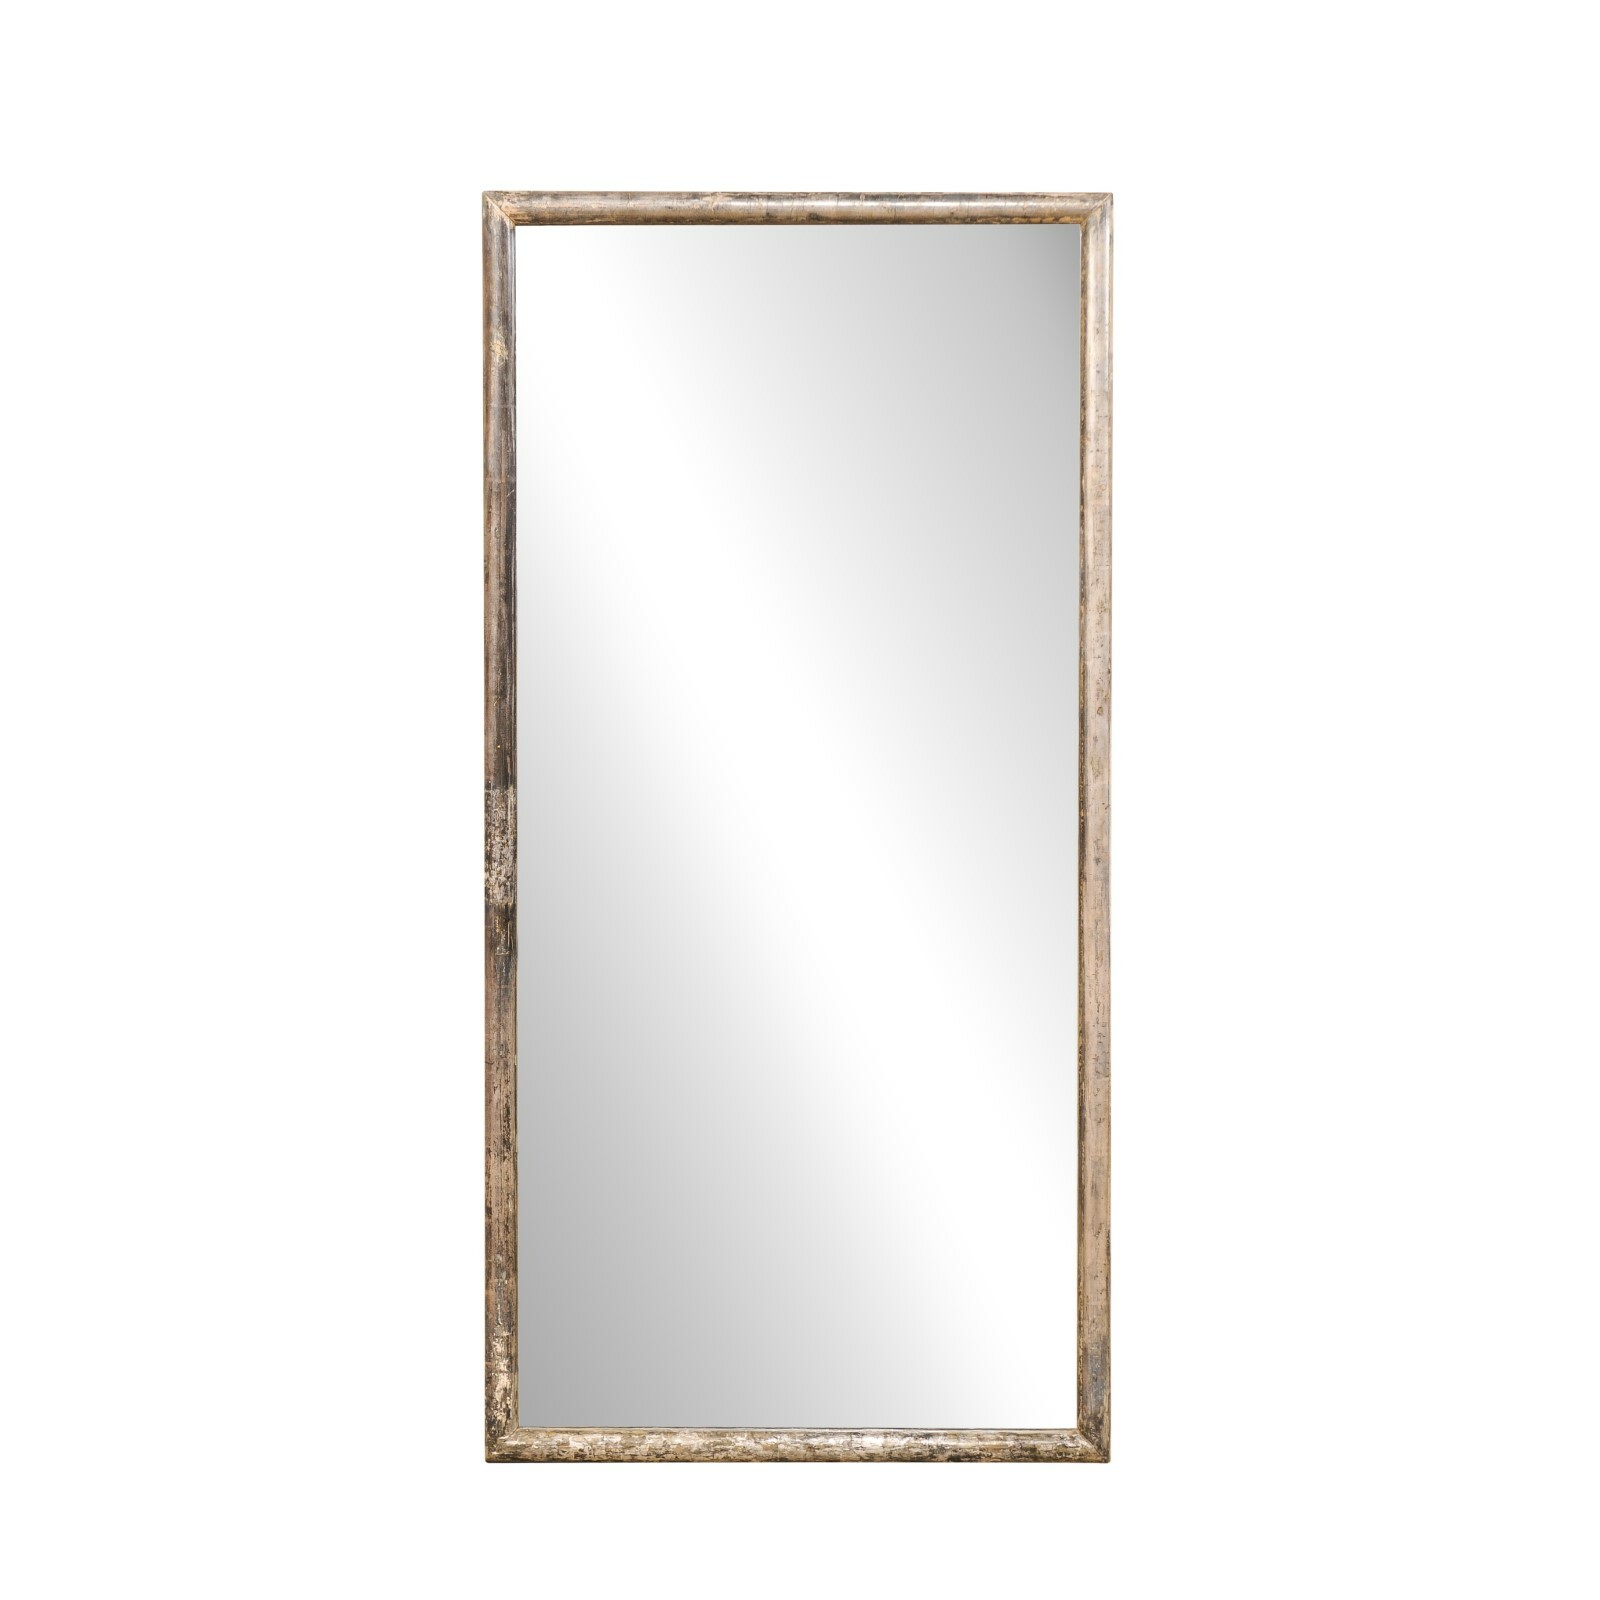 French 5 Ft Mirror w/Silver Finish, 19th C.